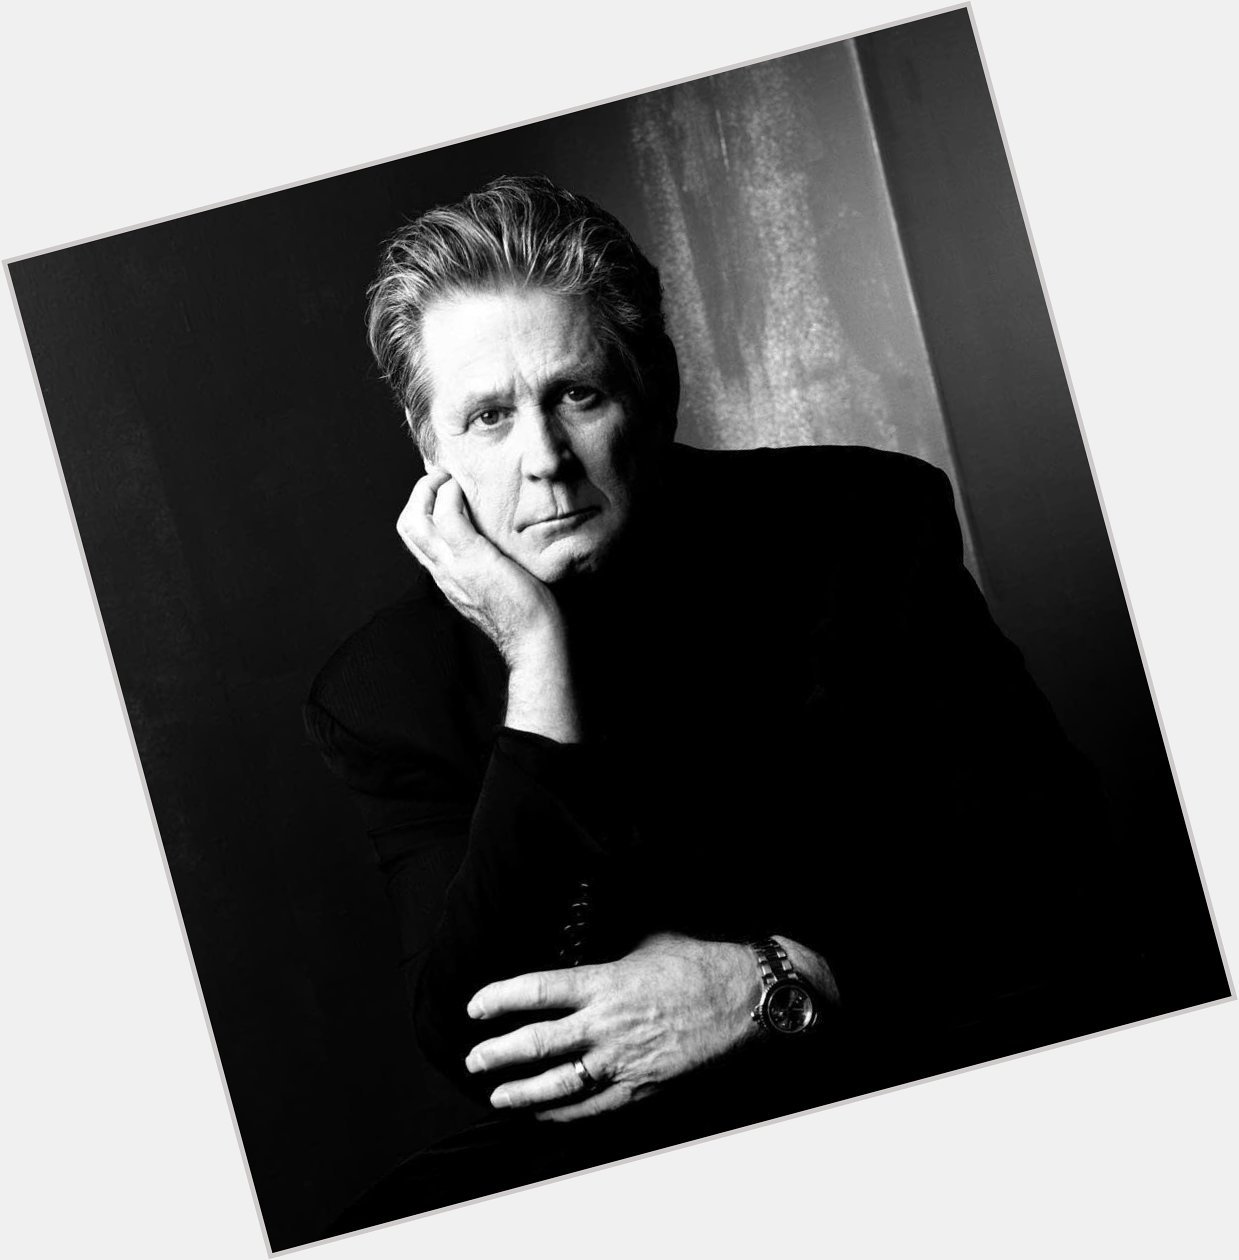 Happy Birthday, Brian Wilson!
My world would not be the same without your music. 